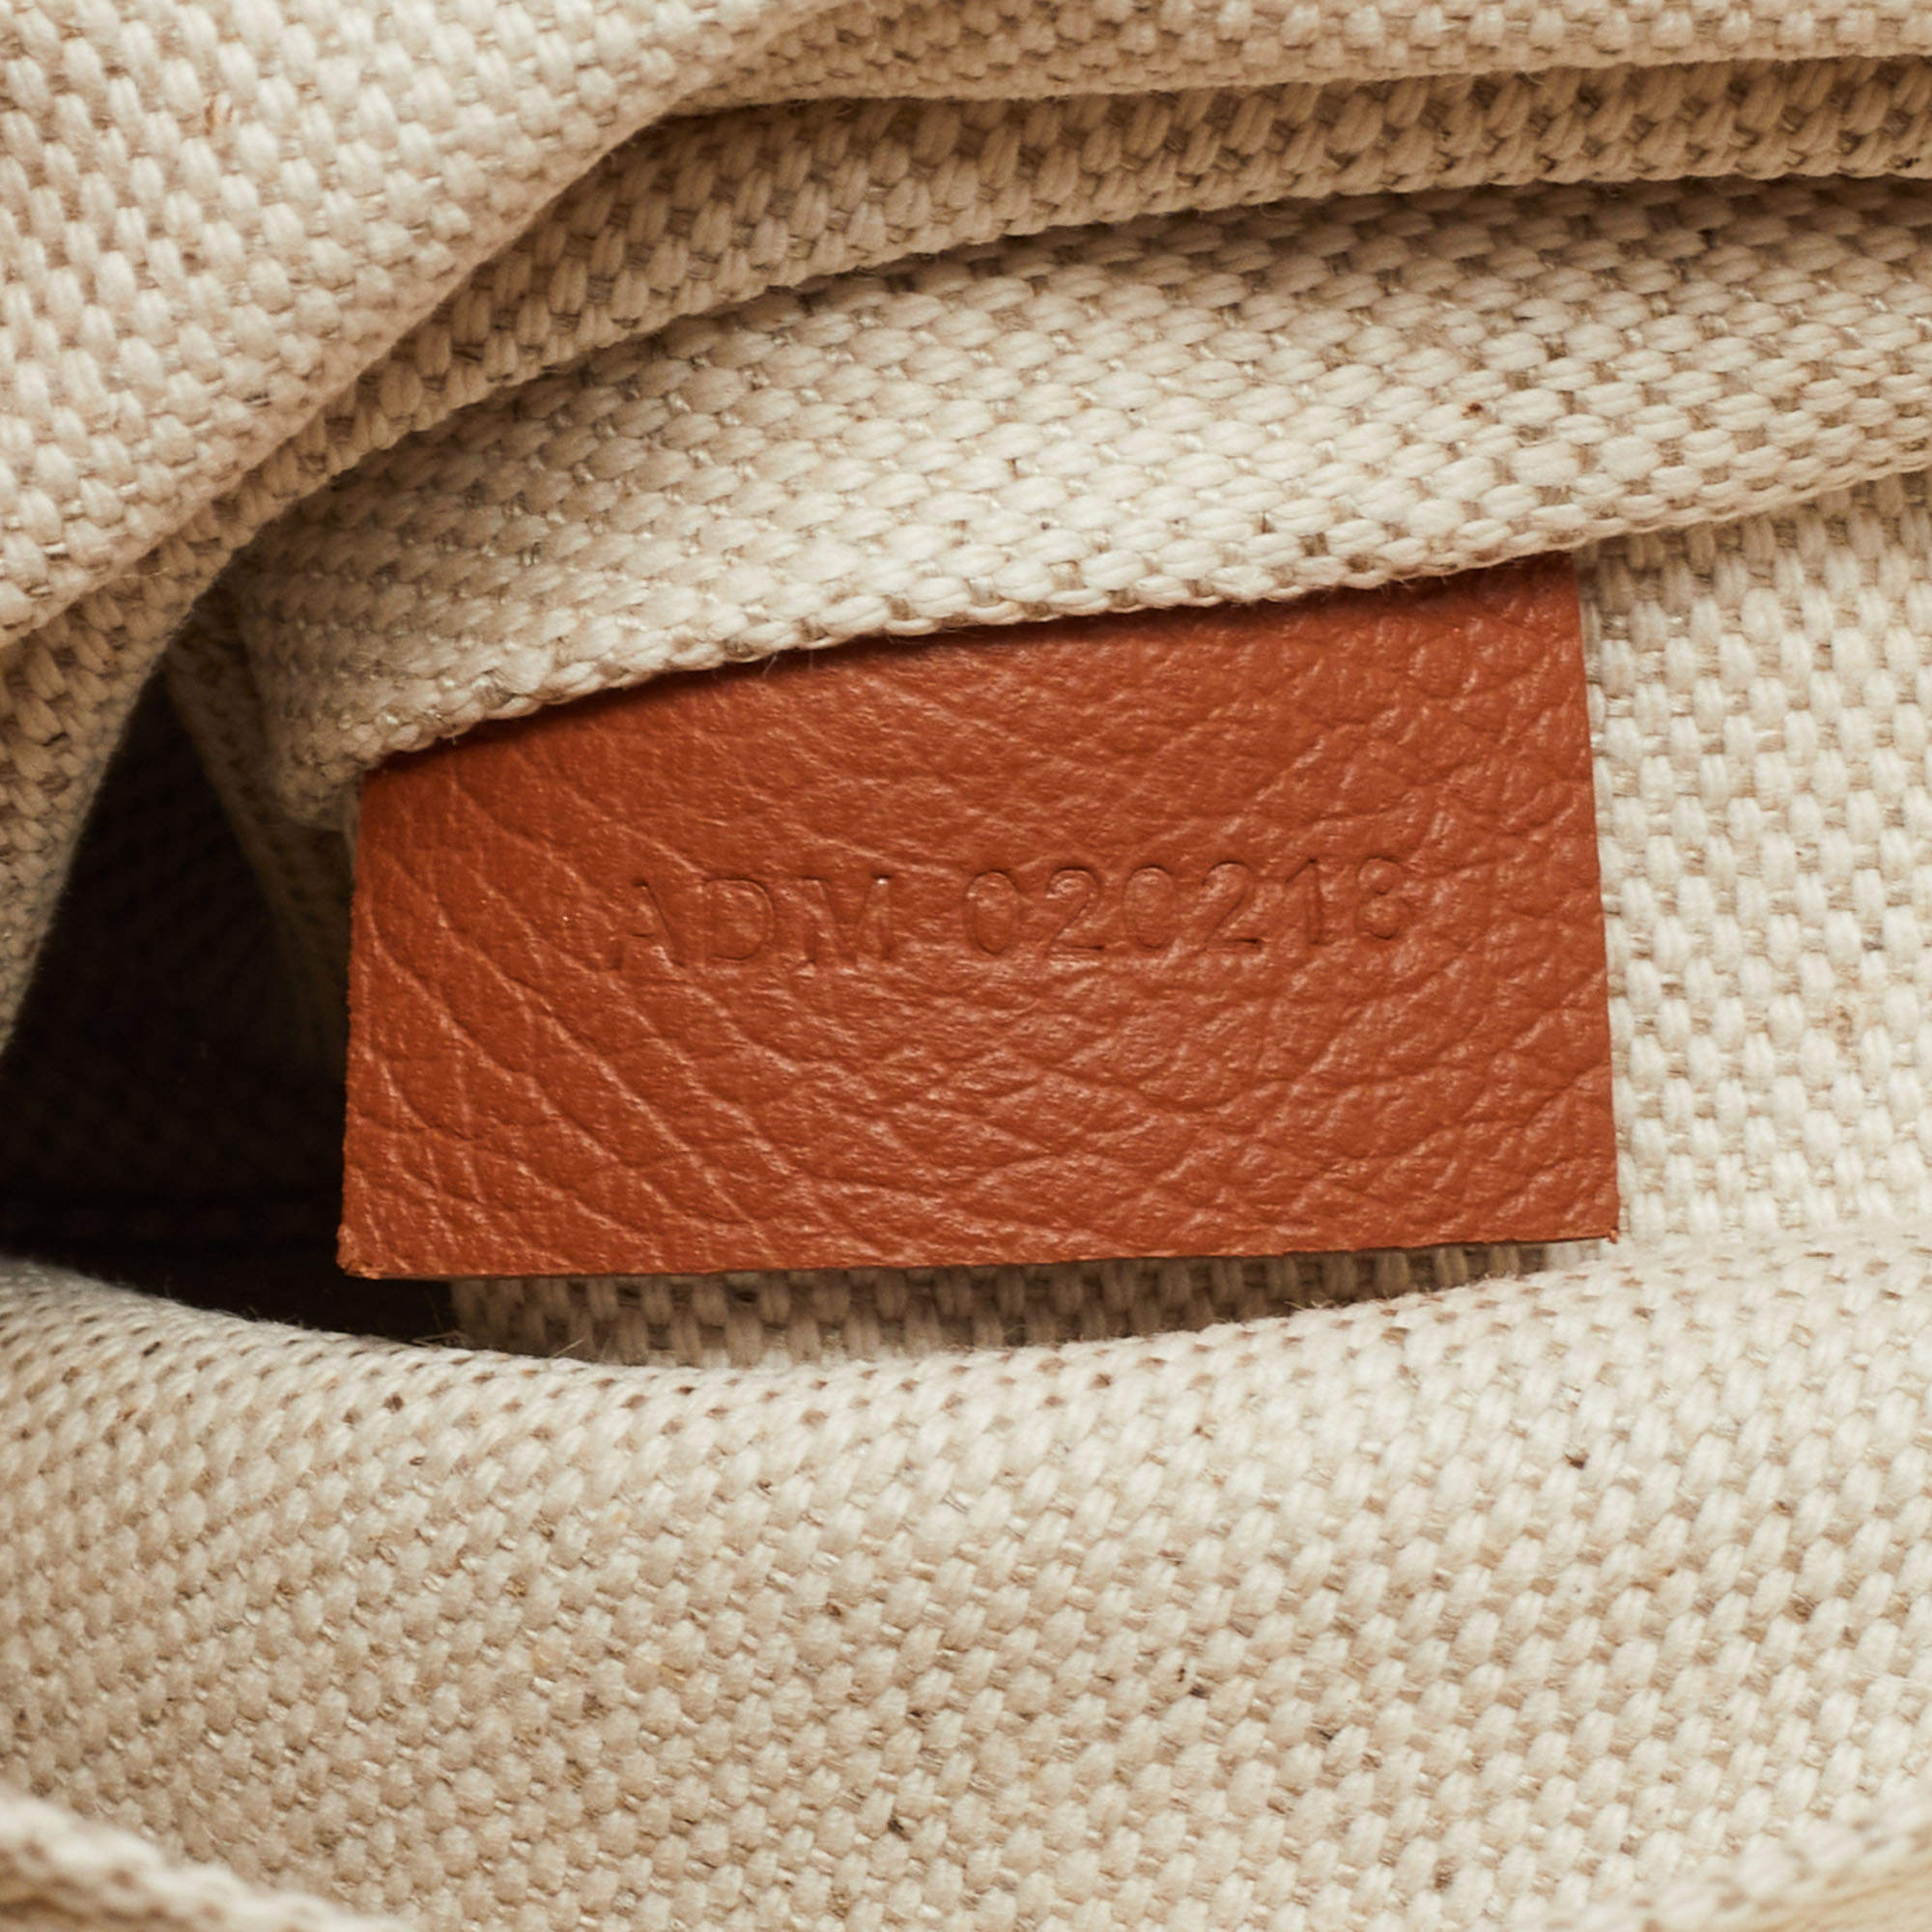 GoyardOfficial on X: The Necessaire perfectly fits into Goyard's